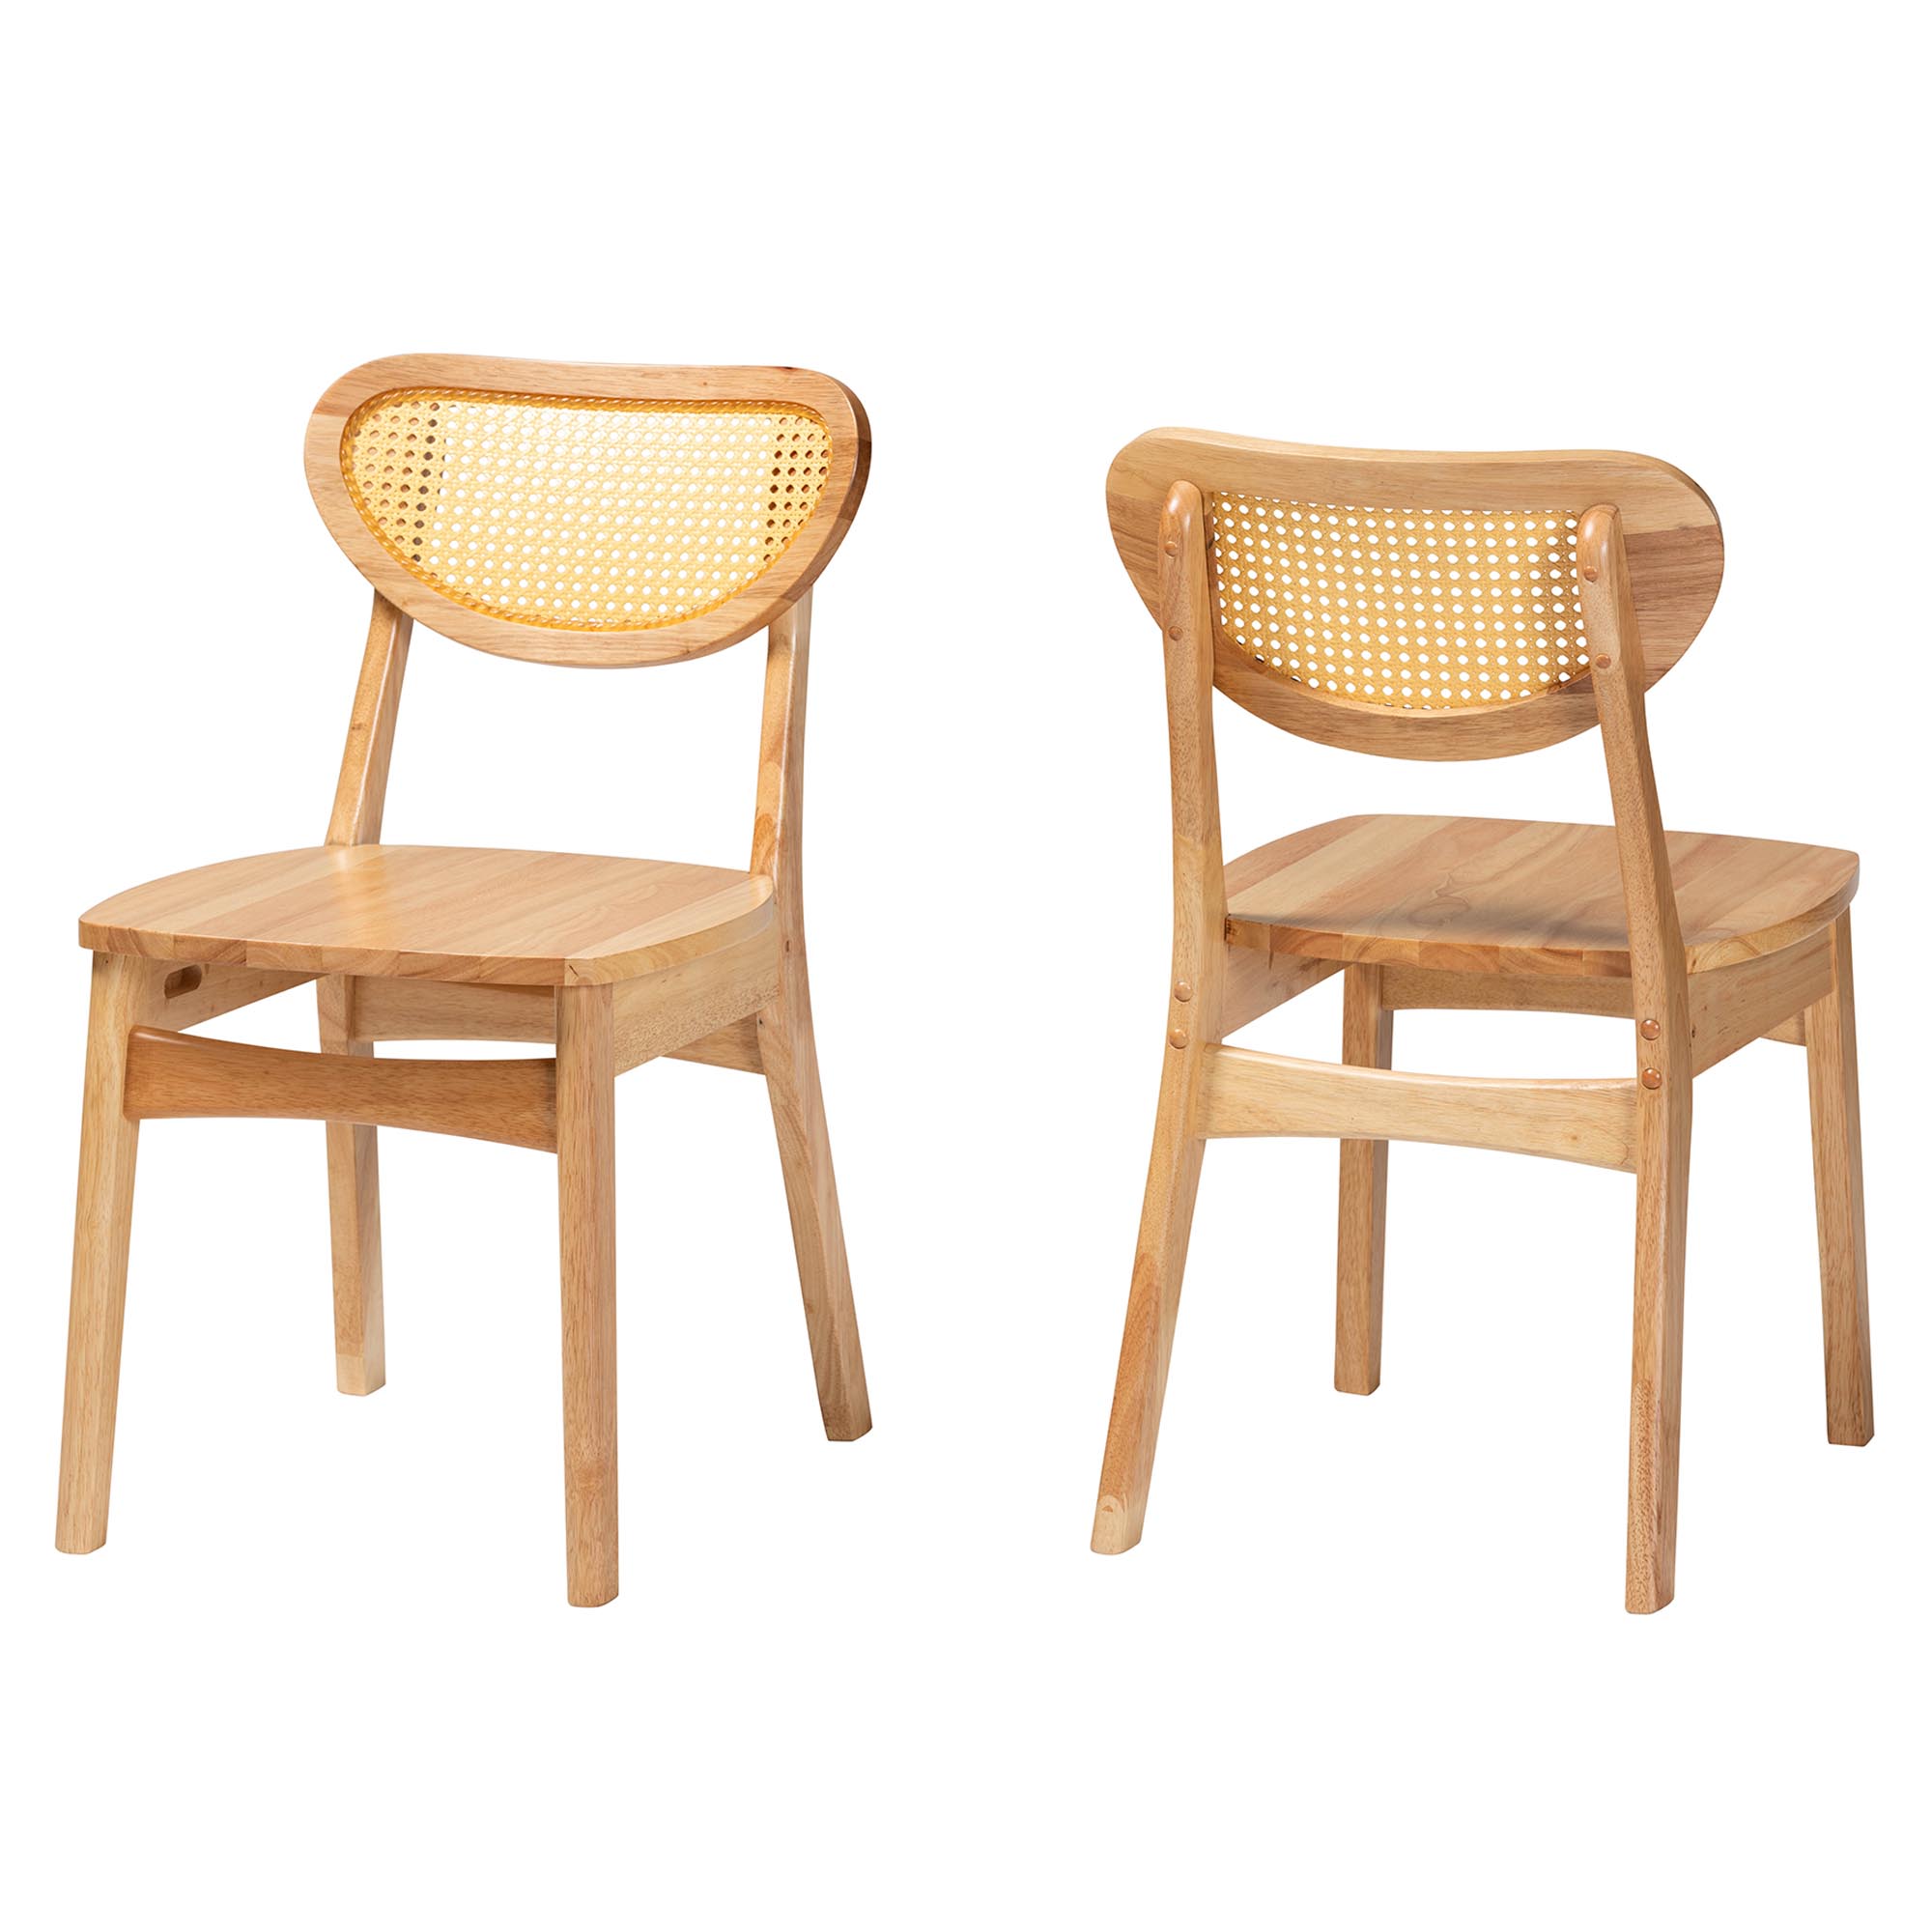 Wood Dining Chairs | Dining Room Furniture | Affordable Modern ...